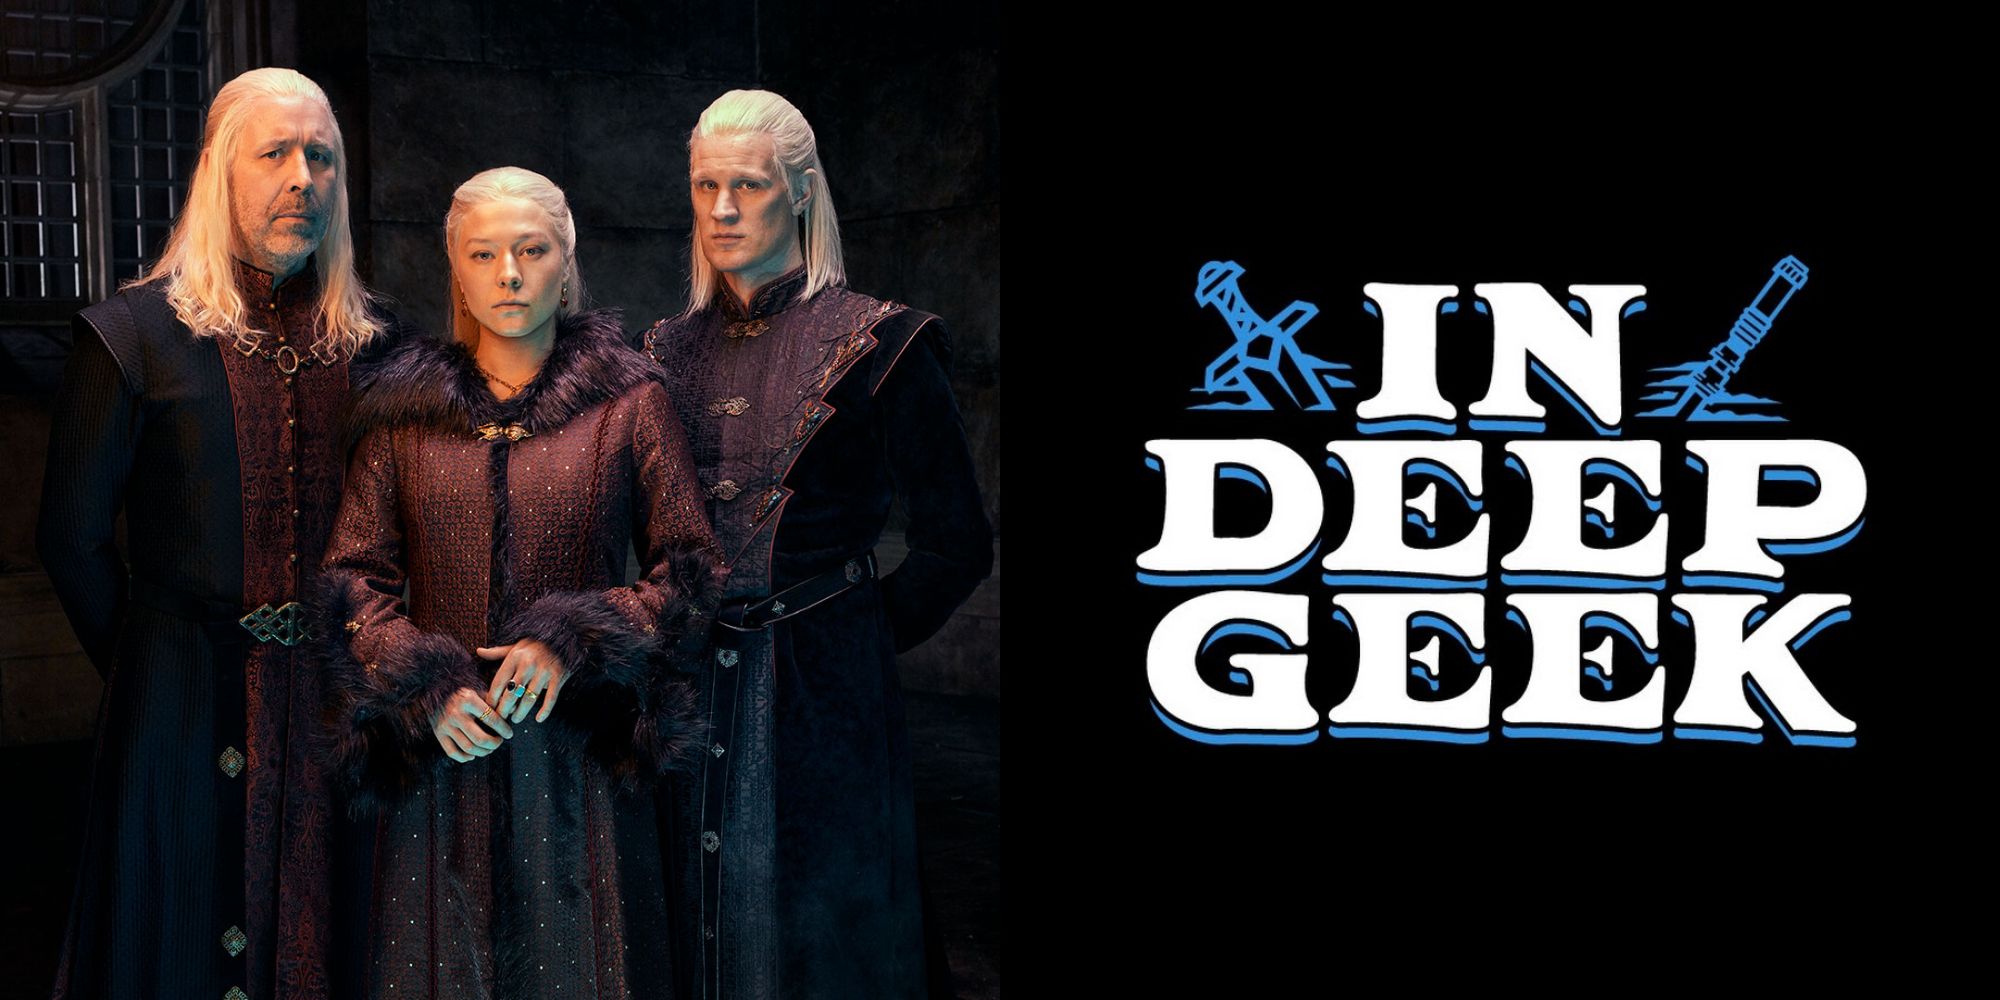 Split image showing characters from House of the Dragon and In Deep Geek's logo